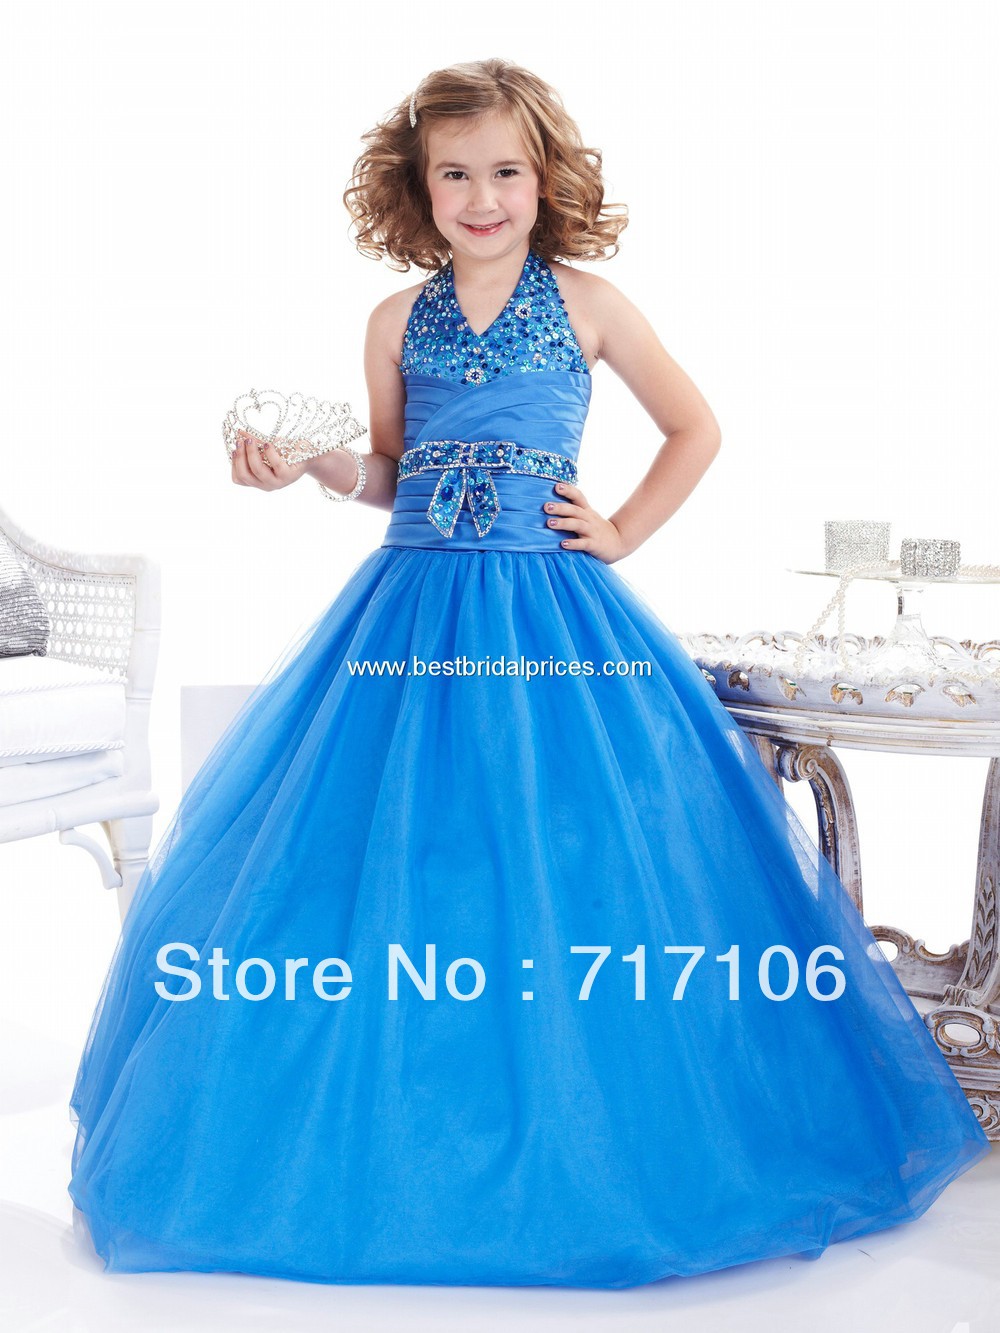 F08 Royal Blue hot sell Free Shipping Fashion New Beaded Organza Lovely Pageant Girl's Party Princess Flower Girl Dresses Gowns